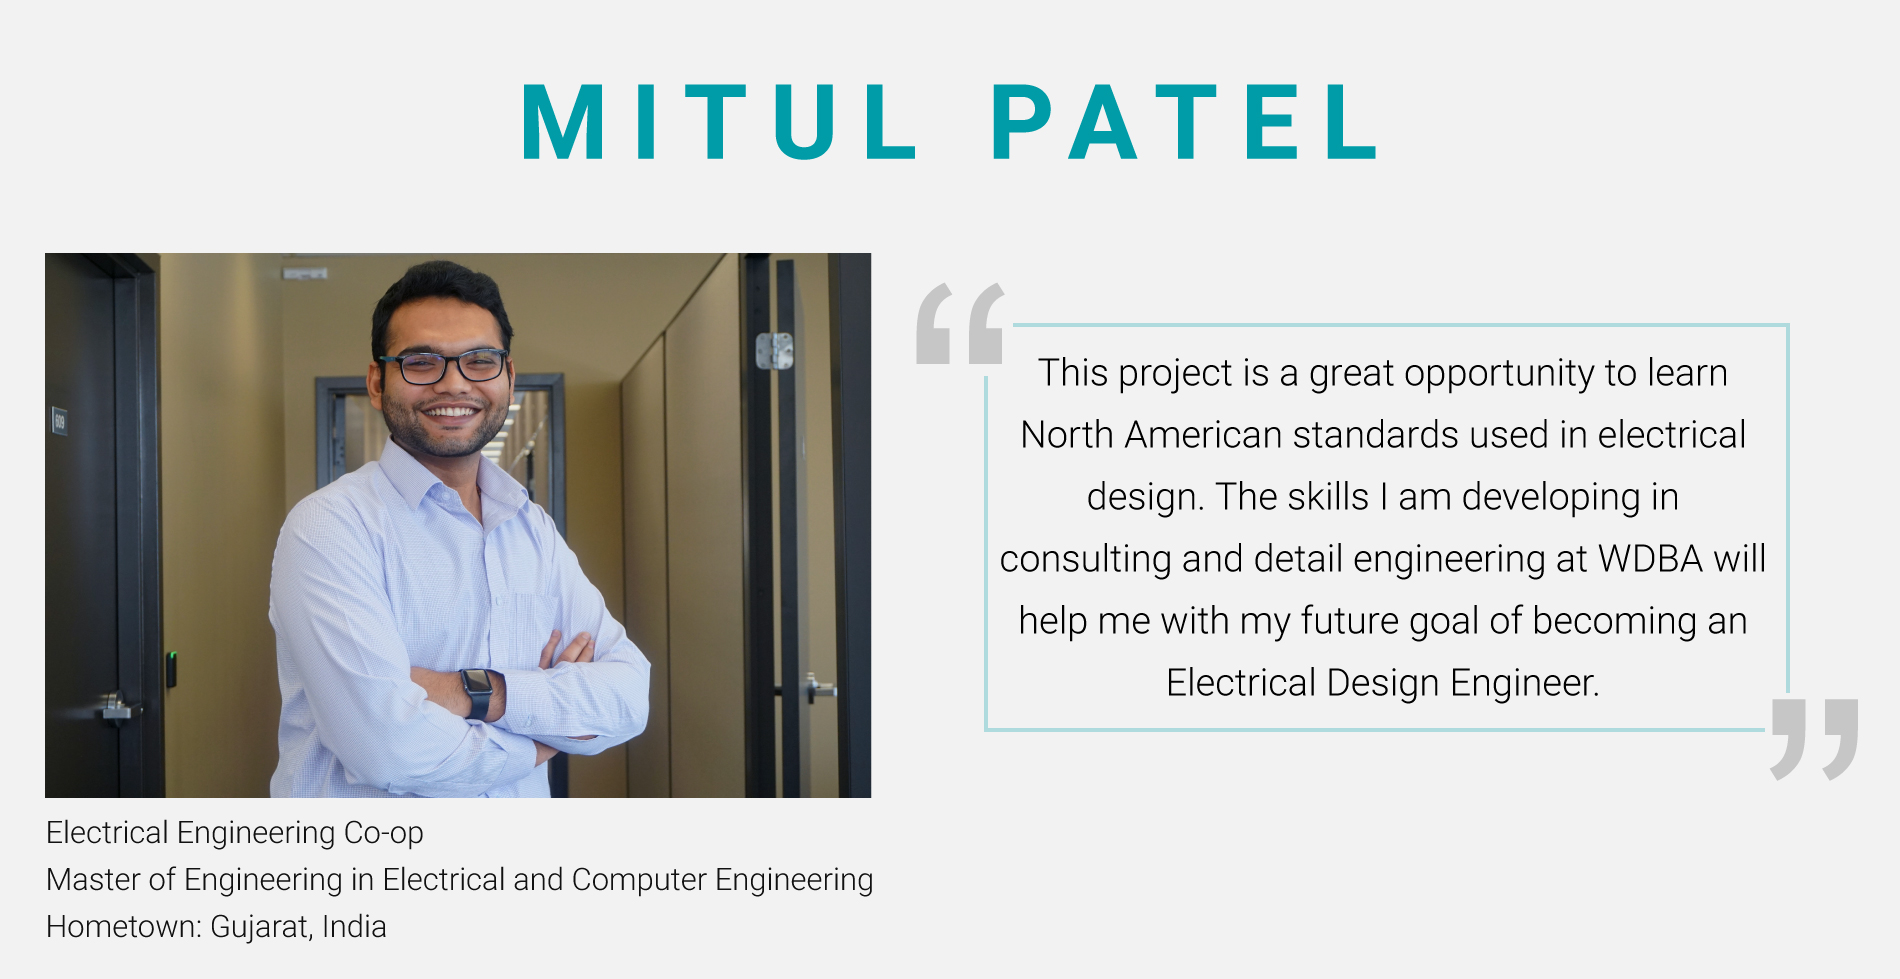 Mitul Patel, Electrical Engineering Co-Op. Master of Engineering in Electrical and Computer Engineering. "This project is a great opportunity to learn North American standards used in electrical design. The skills I am developing in consulting and detail engineering at WDBA will help me with my future goal of becoming an Electrical Design Engineer."